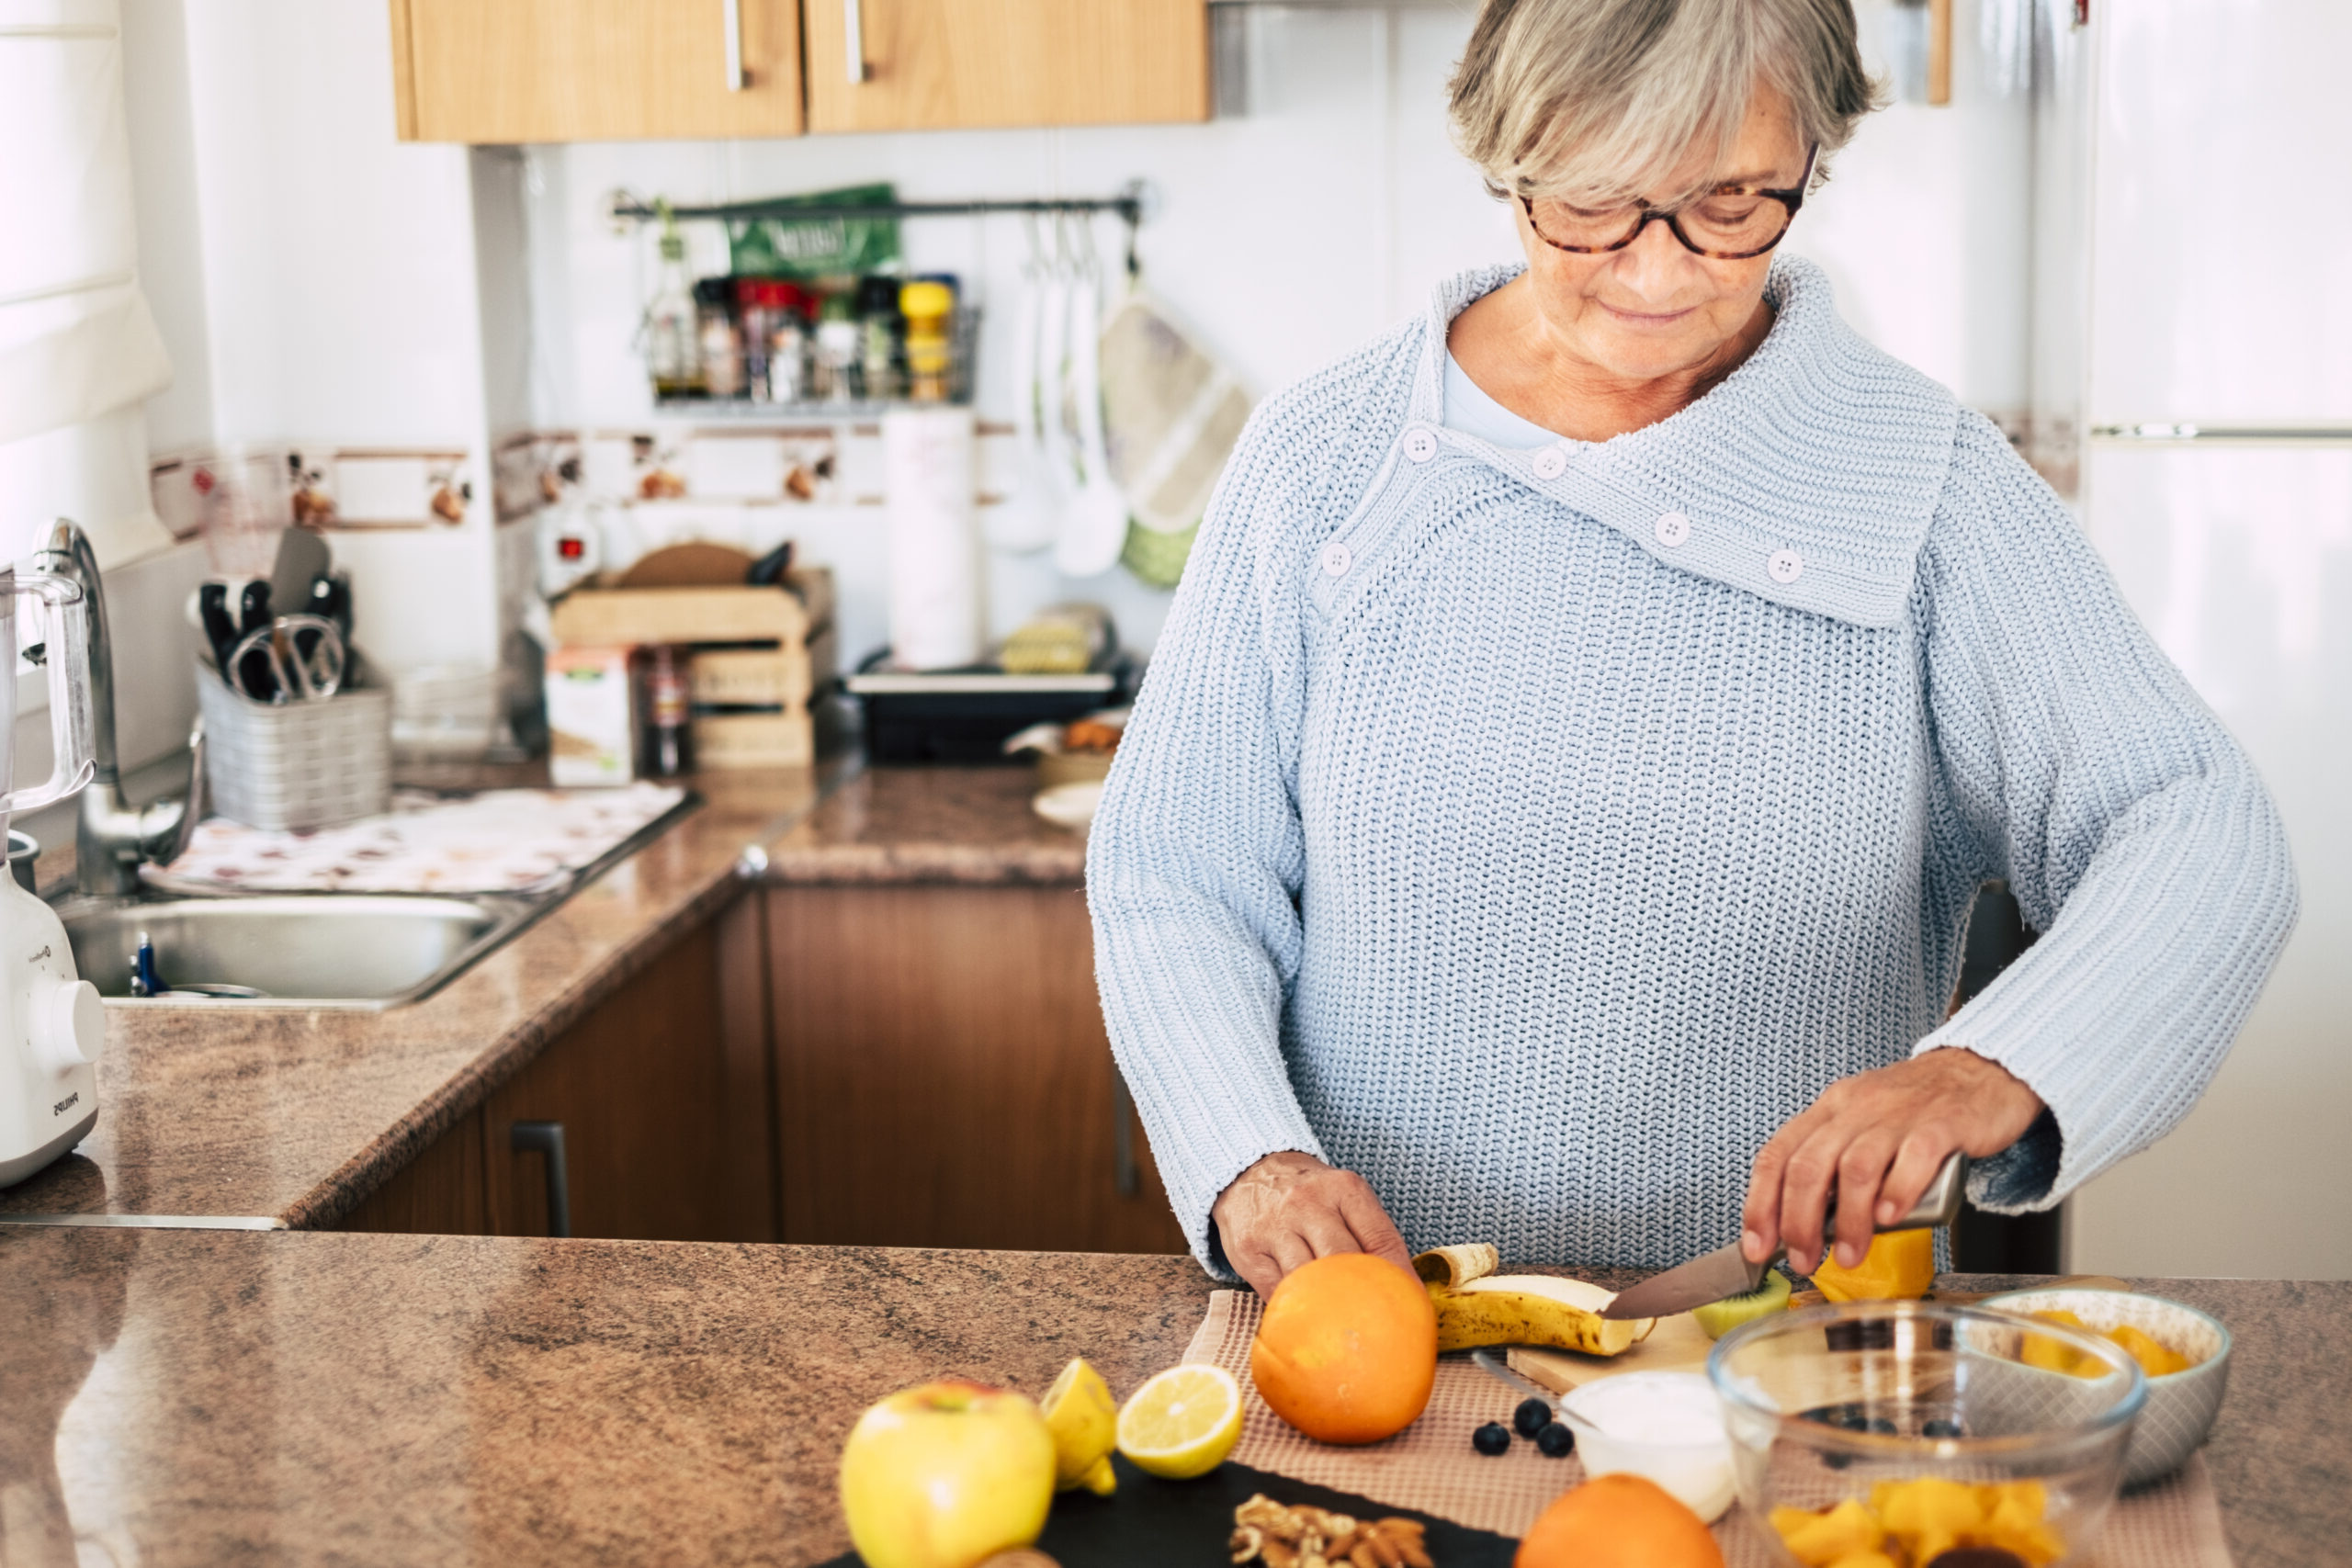 An older woman with glasses and a blue sweater standing at her kitchen counter while chopping fruit.